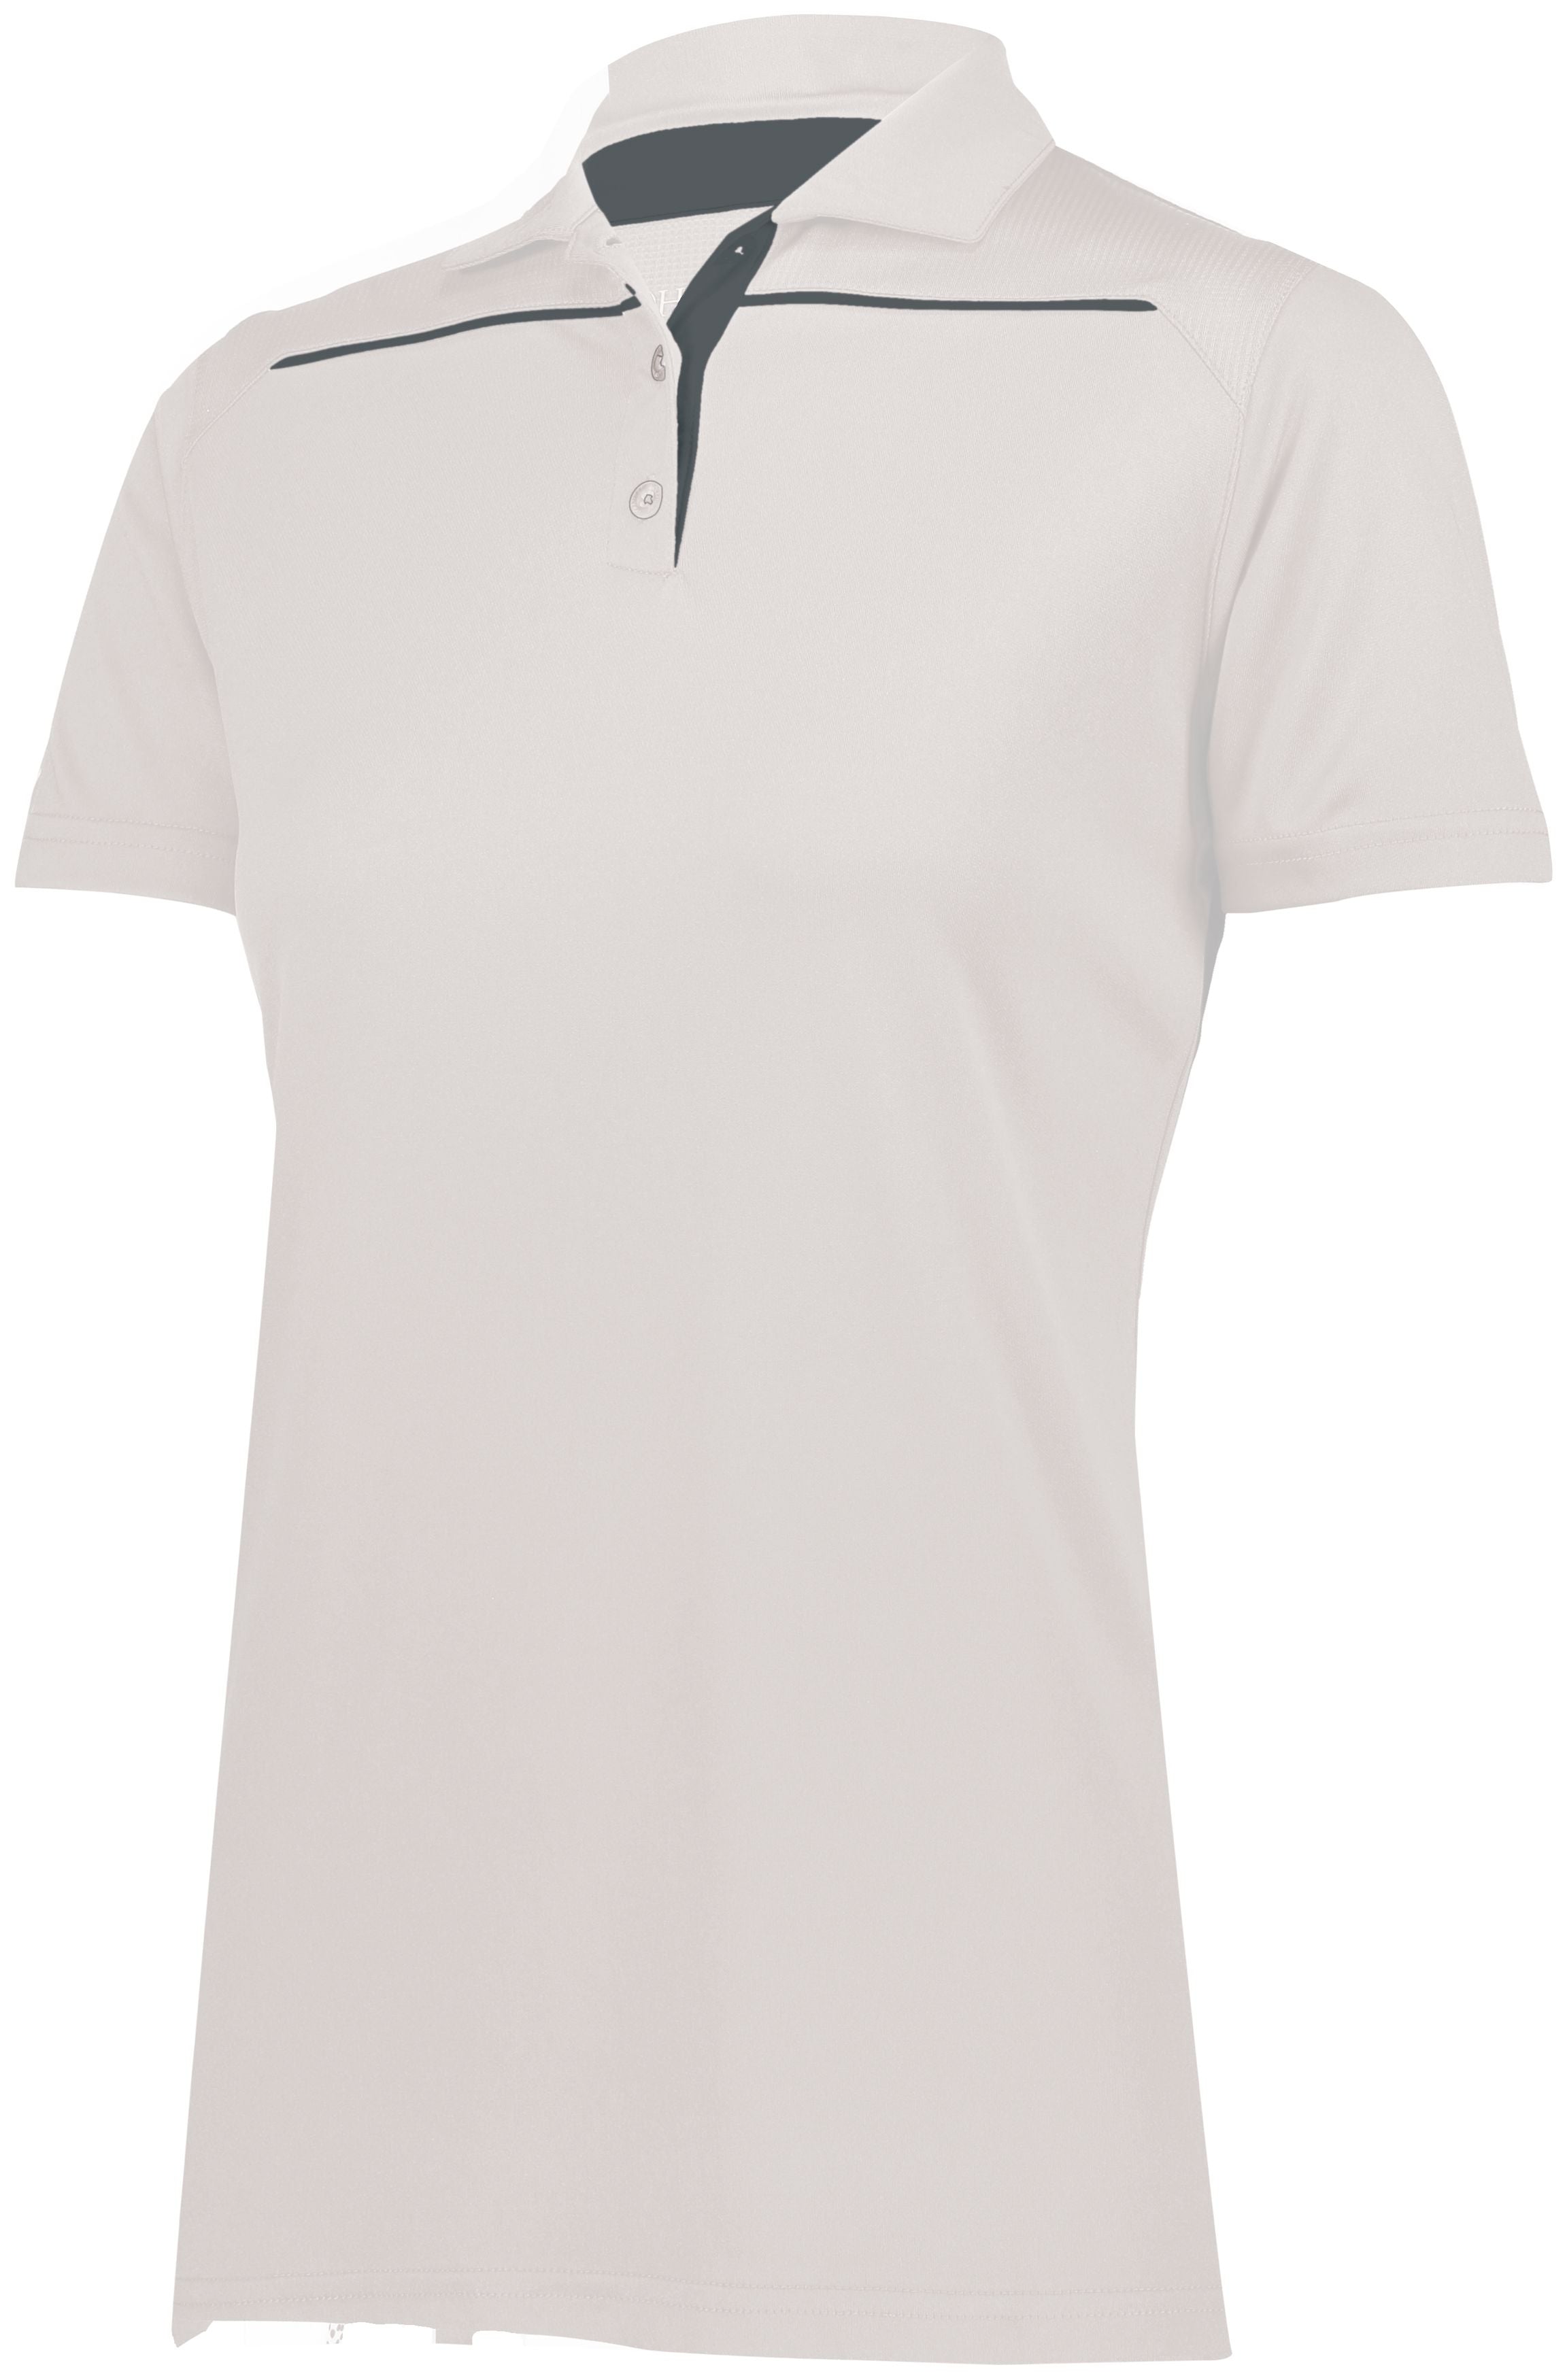 Holloway Ladies Defer Polo in White/Graphite  -Part of the Ladies, Ladies-Polo, Polos, Holloway, Shirts product lines at KanaleyCreations.com